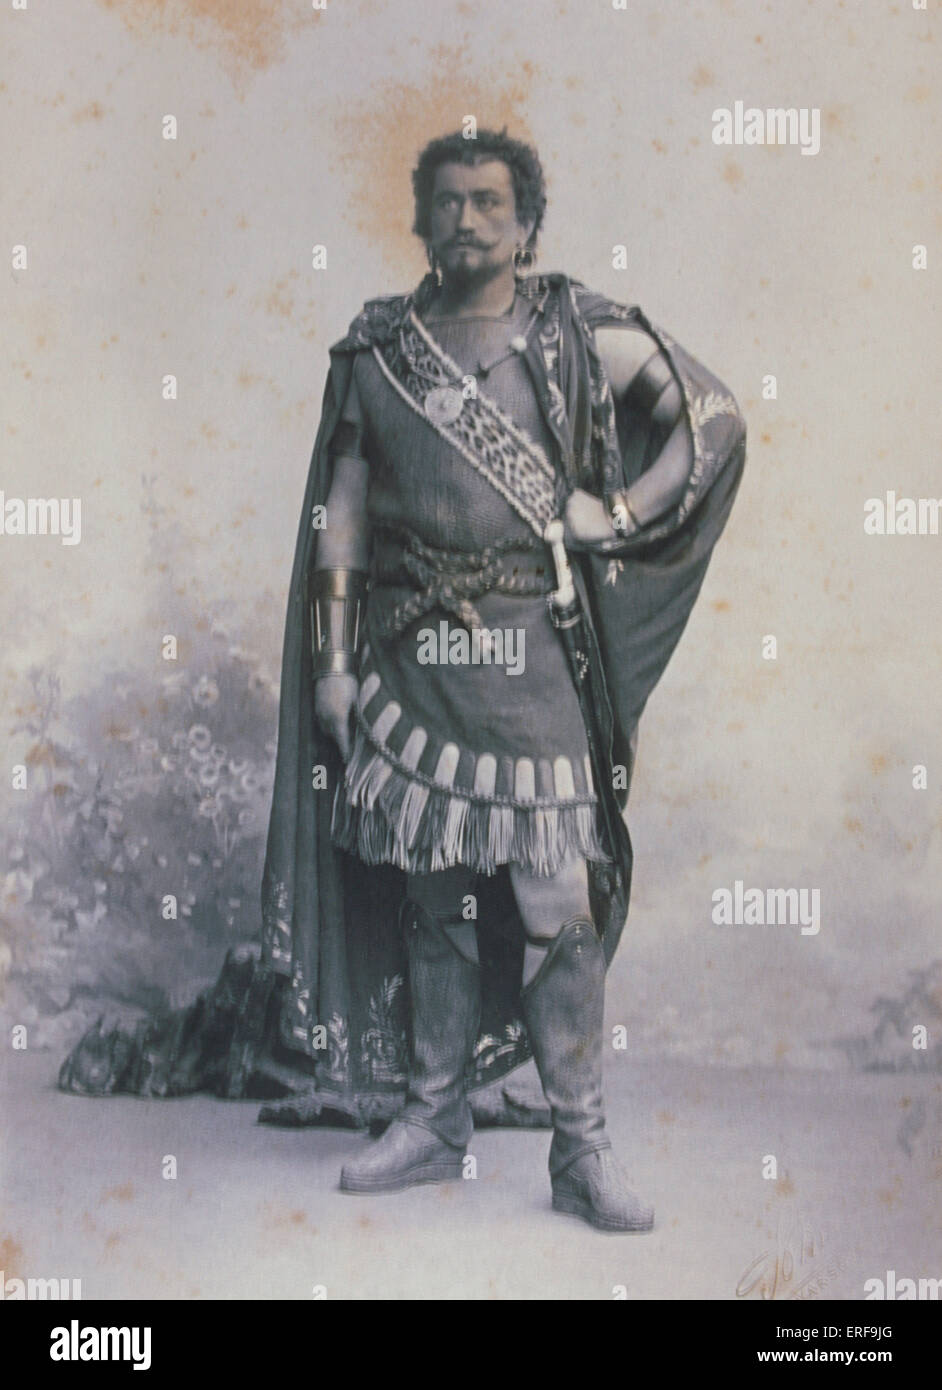 Maurice Renaud as 'Saléza' in role of Salammbô. Opera composed by Loius-Etienne-Ernest Reyer. French composer, 1823 - 1909 Stock Photo